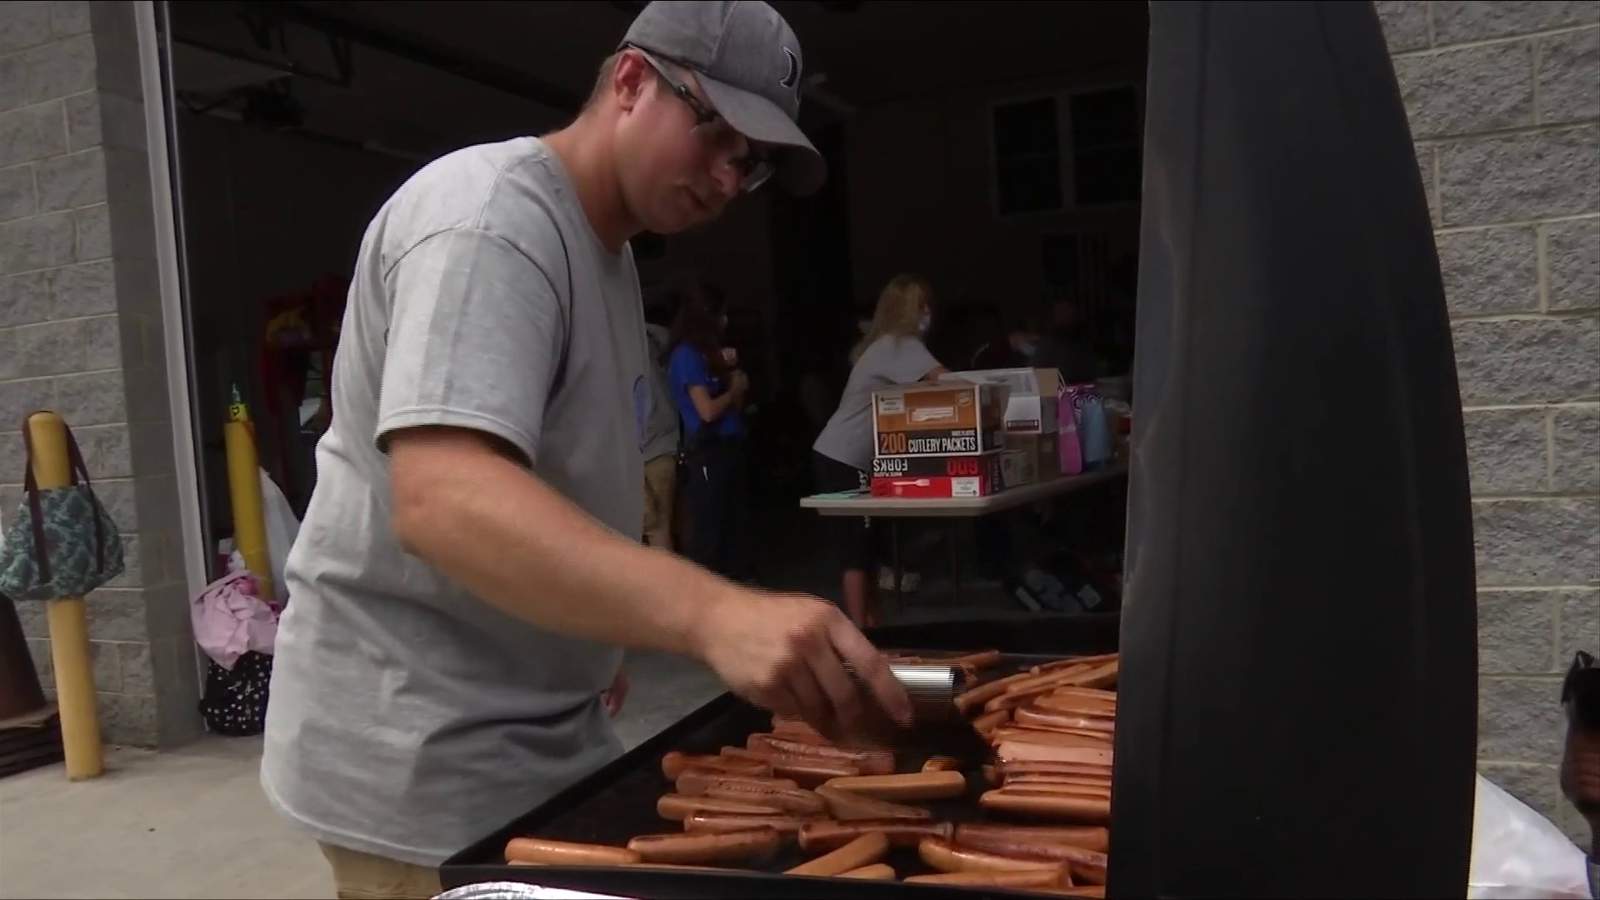 Pop-up hot dog benefit raises more than $20,000 for Giles County first responder